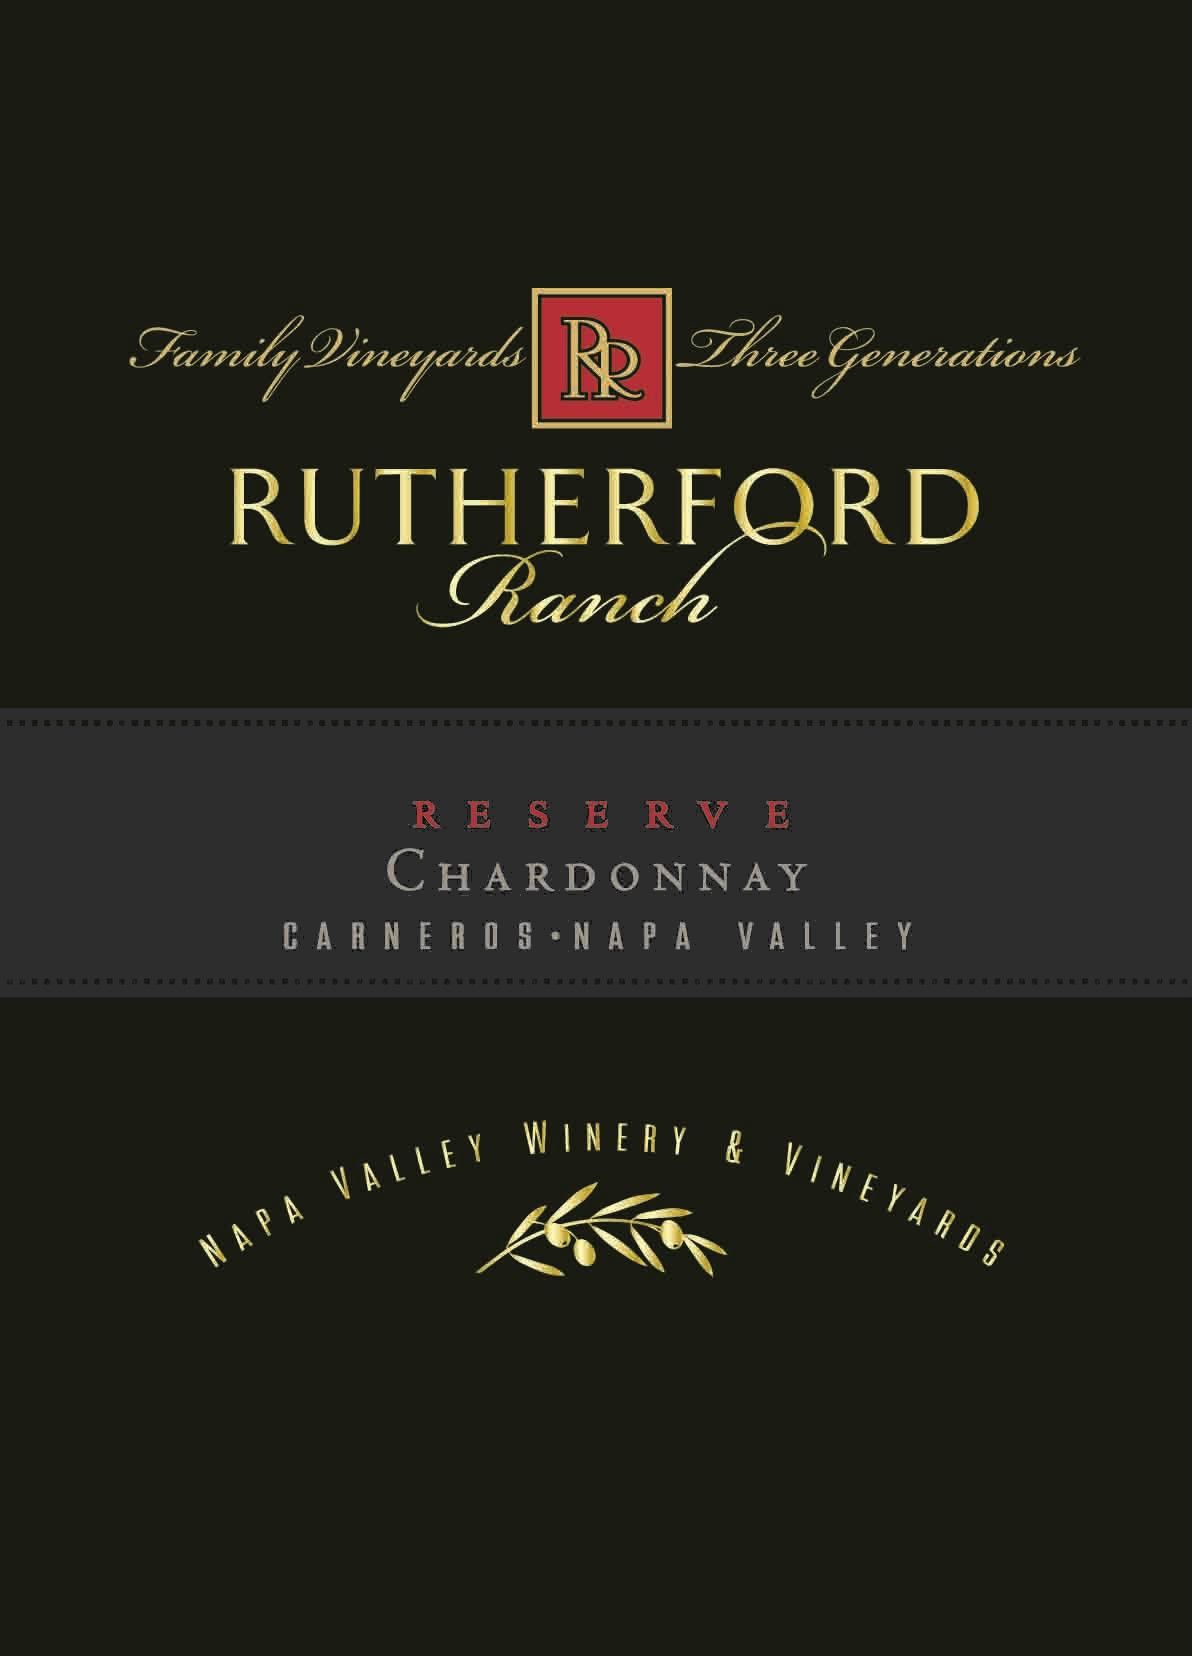 Rutherford Ranch Reserve Chardonnay 2017